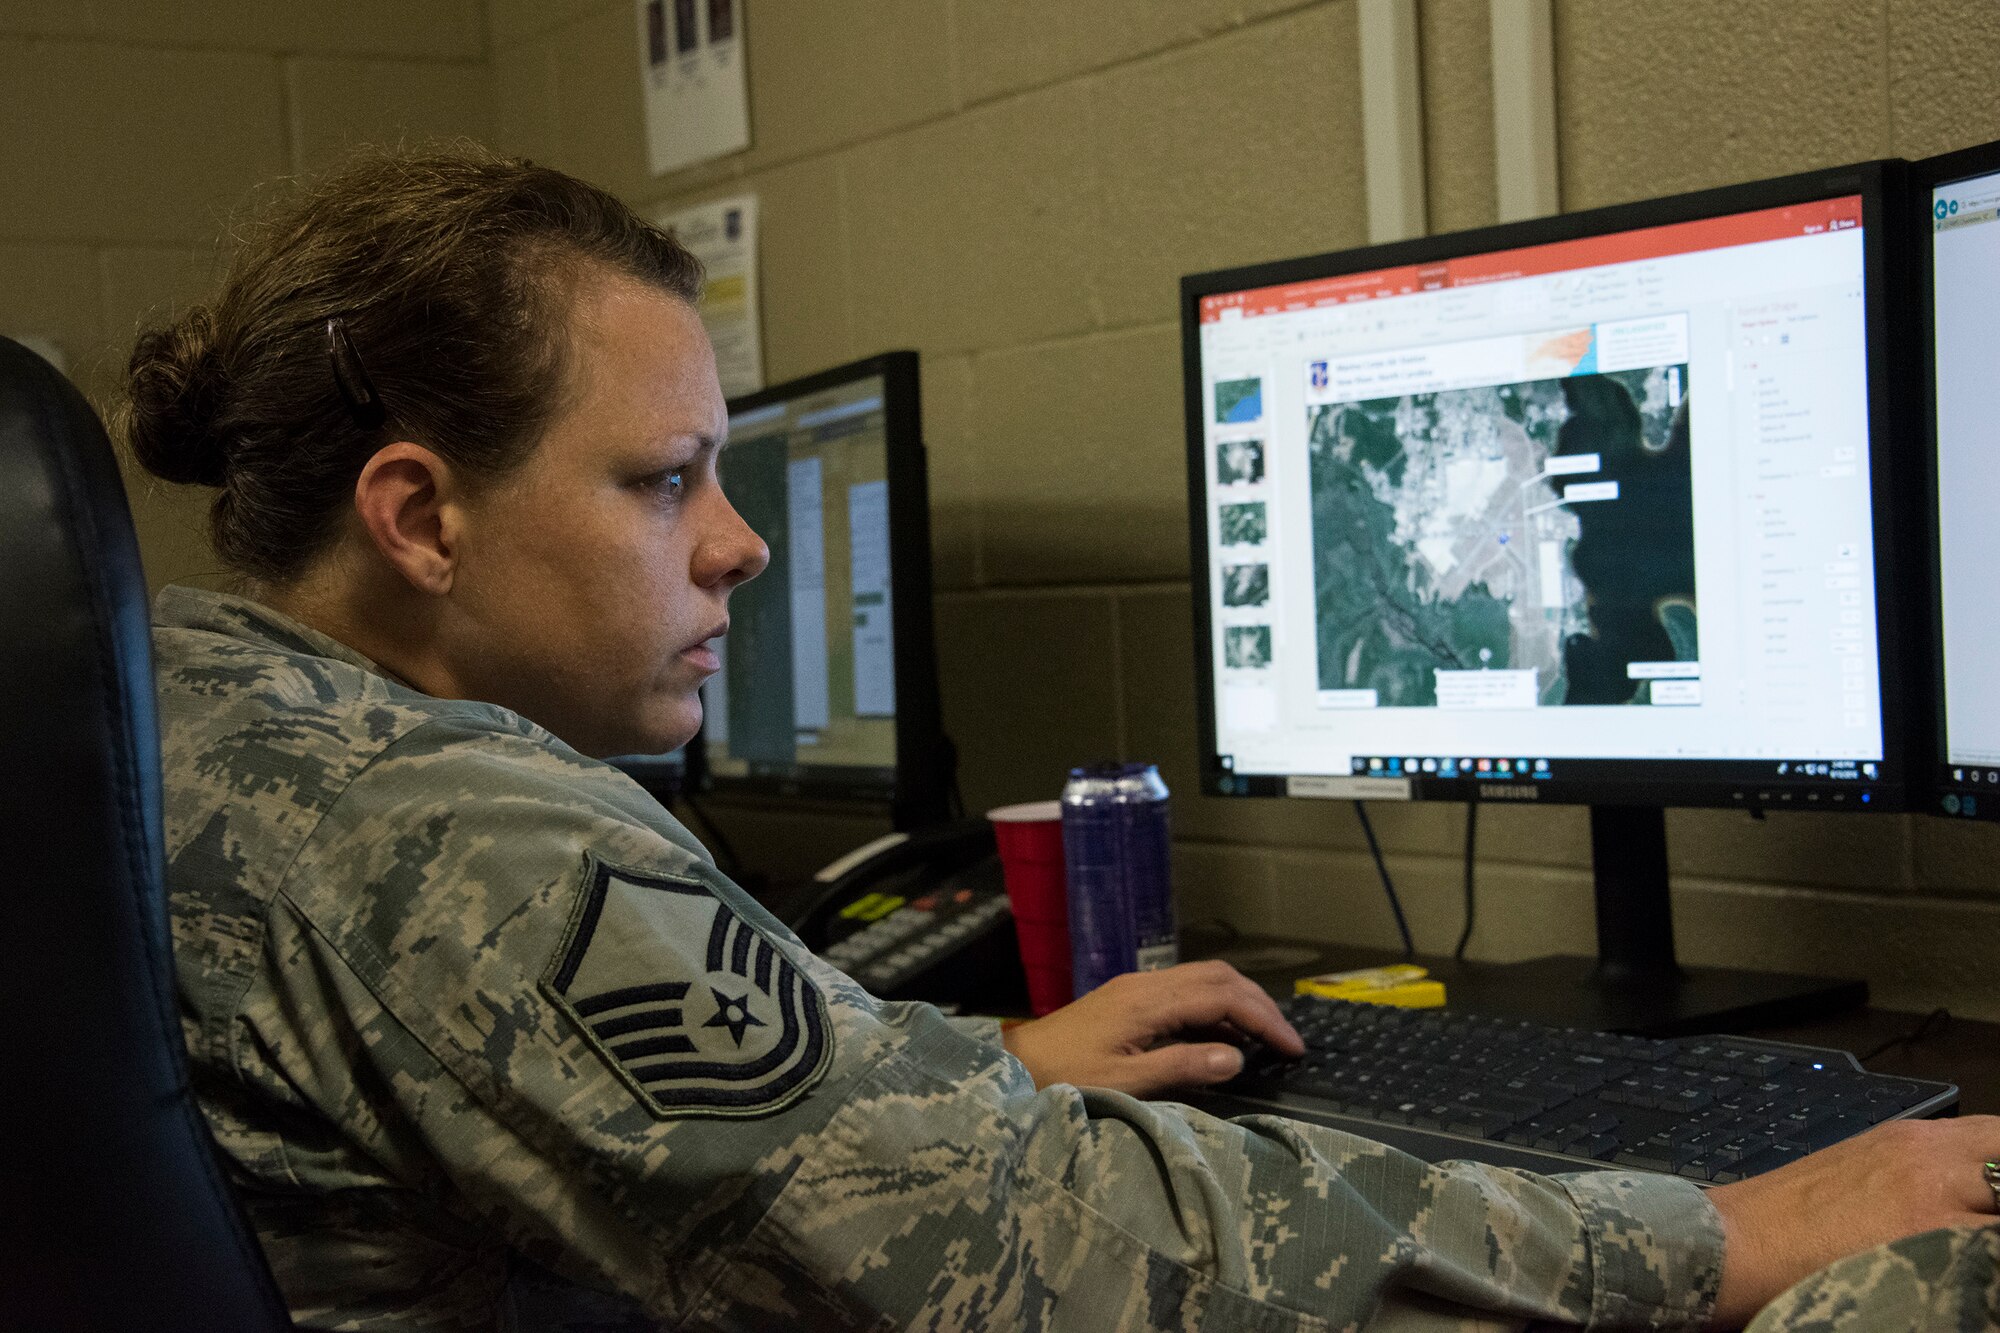 Master Sgt. Twila Costiloe, 188th Wing intelligence analyst, creates graphical information products in the 188th Unclassified Processing, Assessment, and Dissemination element at Ebbing Air National Guard Base, Ark., to support Hurricane Florence responders Sept. 13, 2013. The UPAD rapidly provides graphical information products requested by incident commanders located across the storm’s path. (U.S. Air National Guard photo by Tech. Sgt. John E. Hillier)